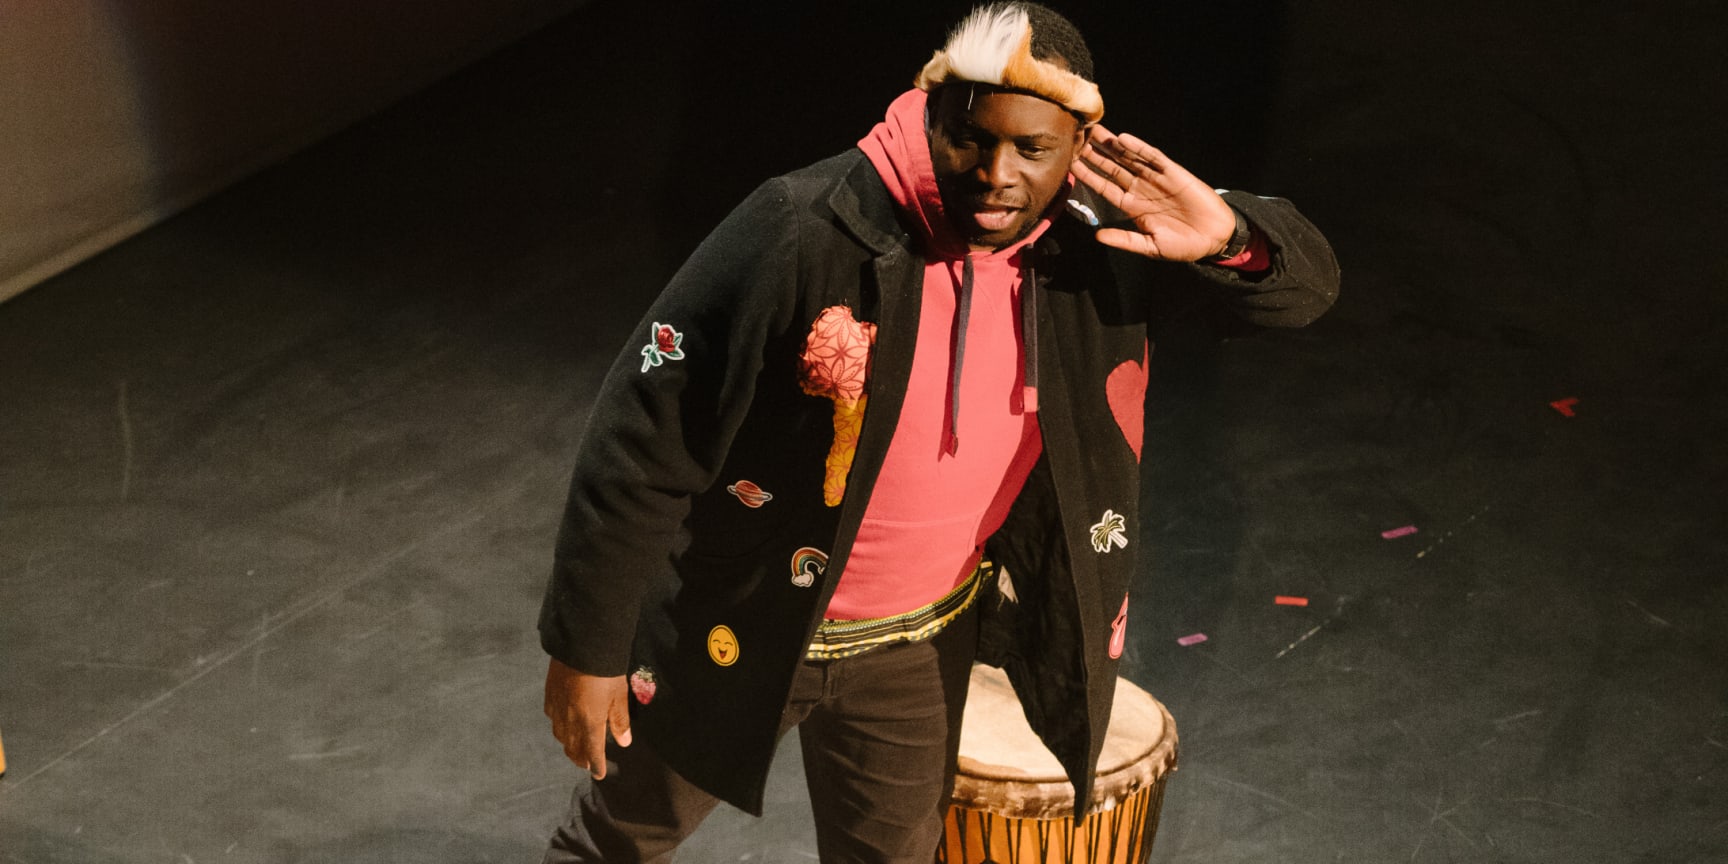 Butshilo Nleya, a  black man wearing black jeans, a black jacket, a pink top and trainers stands on a stage next to a drum with his hand to his ear as if listening for the audience.